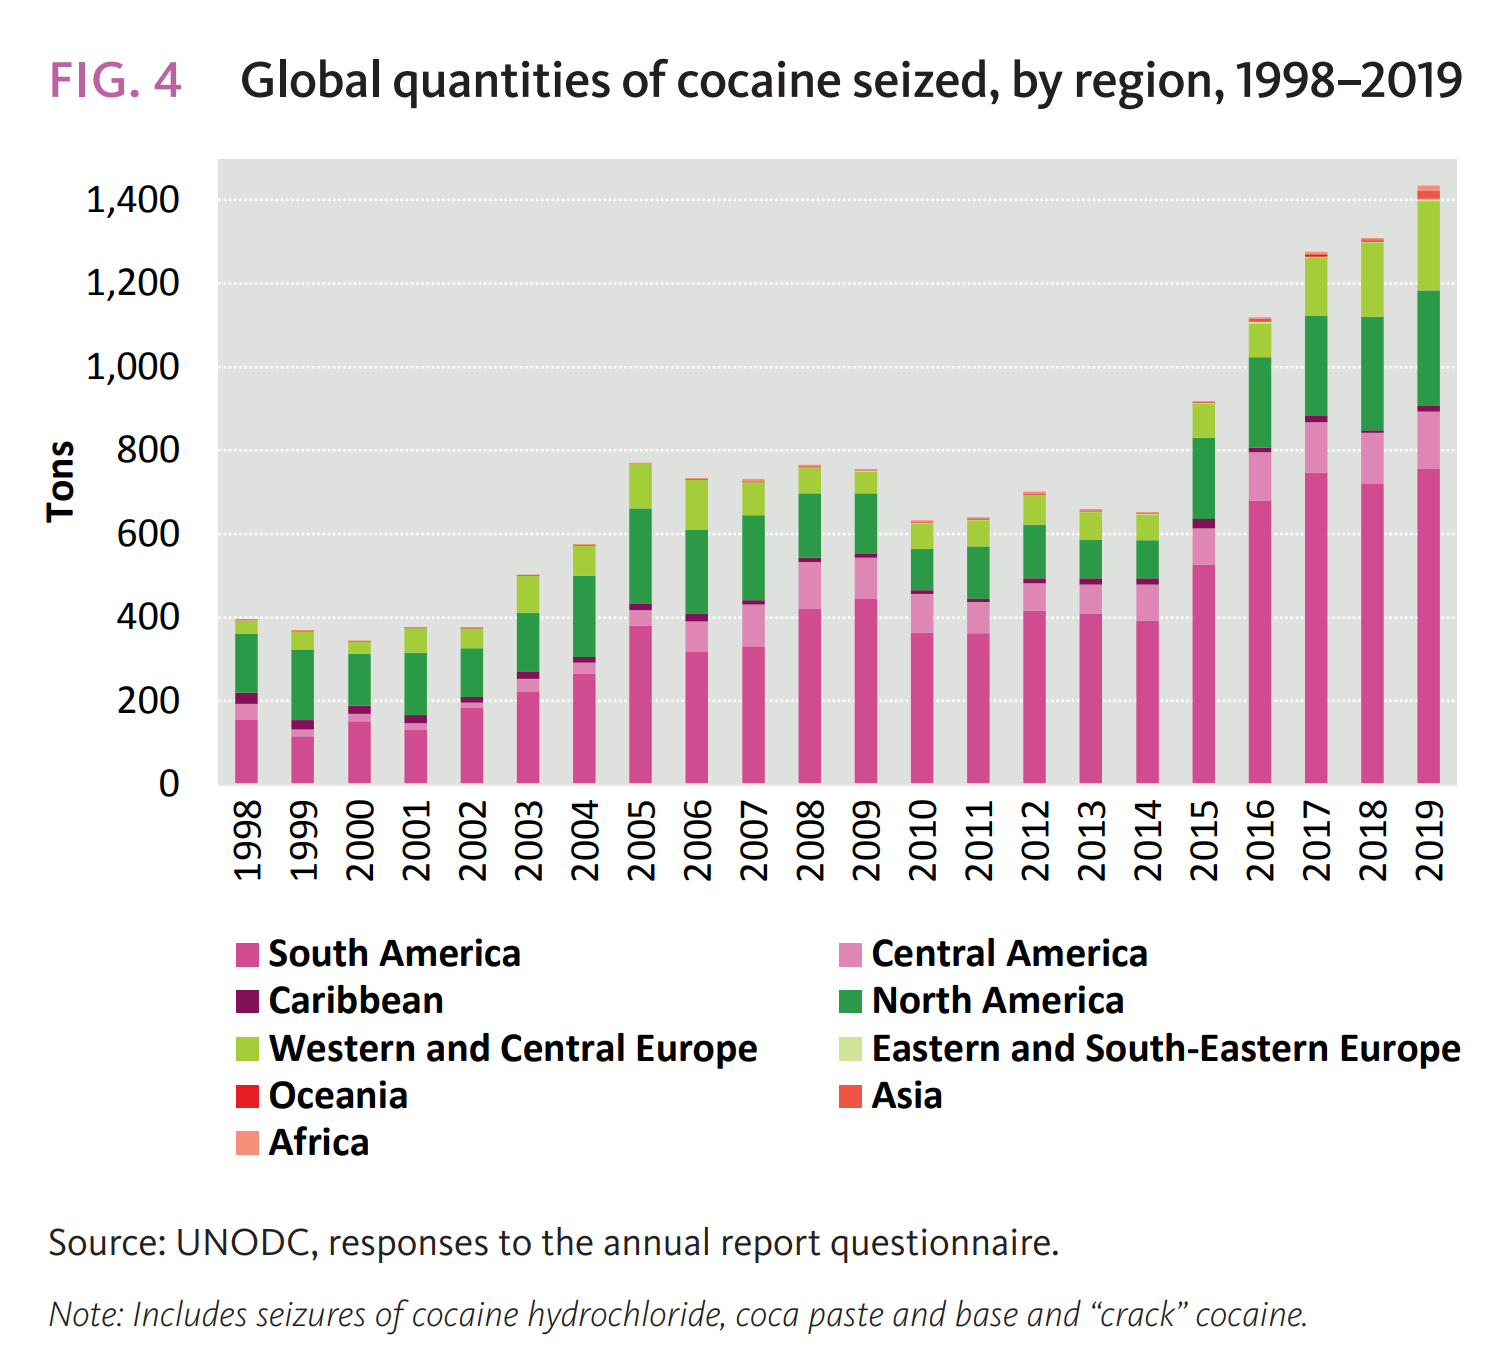 Global quantities of cocaine seized, by region, 1998–2019. Quantities of cocaine seized reached record levels in 2019. In 2019, the global quantity of cocaine seized increased by 9.6 percent compared with the preceding year to reach 1,436 tons (of varying purities), a record high. The 90 percent increase in the quantities of cocaine seized between 2009 and 2019 is likely a reflection of a combination of factors, including an increase in cocaine manufacture (50 per cent between 2009 and 2019) and a subsequent increase in cocaine trafficking, as well as an increase in the efficiency of law enforcement, which may have contributed to an increase in the overall interception rate. Graphic: UNODC